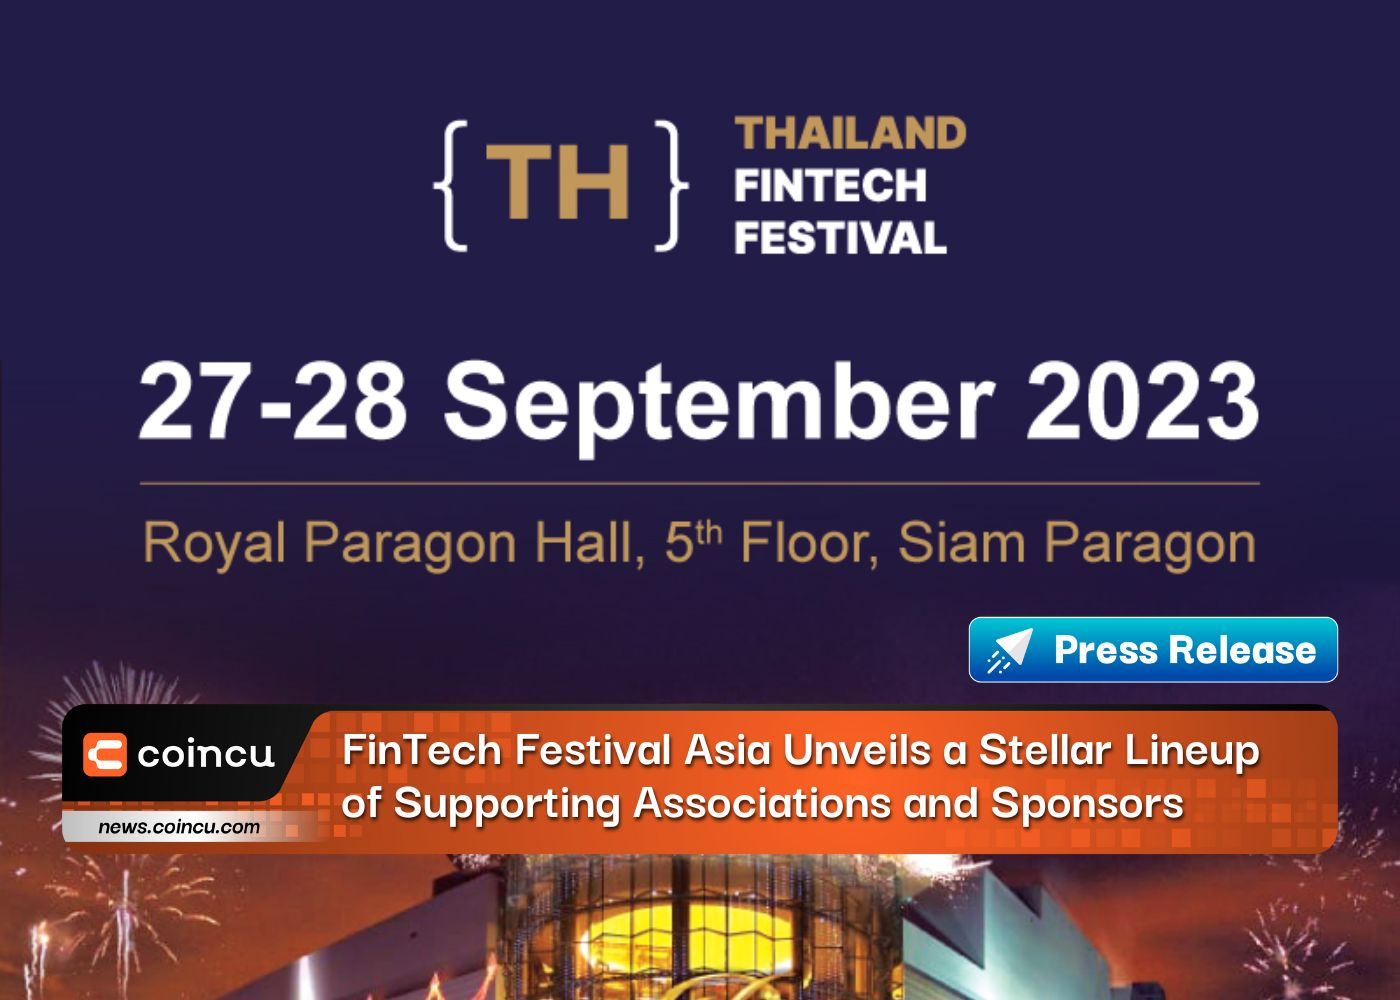 FinTech Festival Asia Unveils a Stellar Lineup of Supporting Associations and Sponsors 